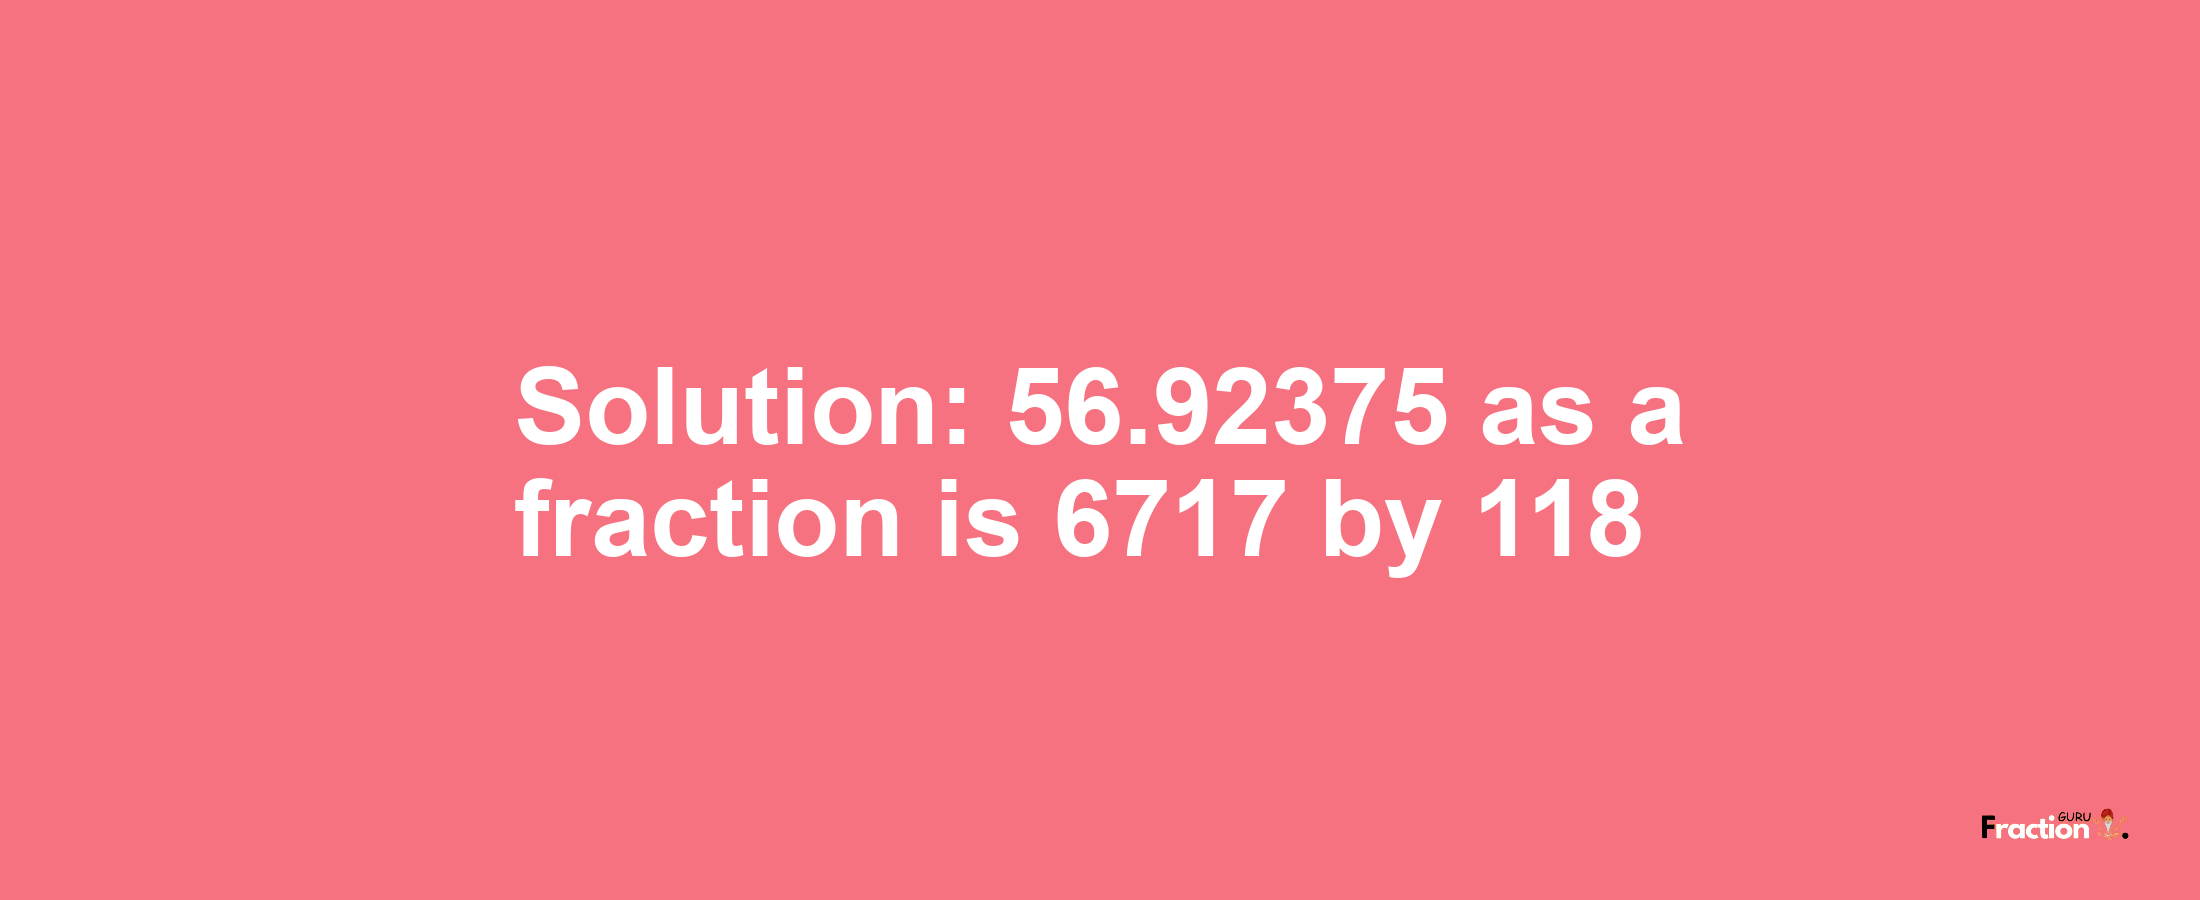 Solution:56.92375 as a fraction is 6717/118